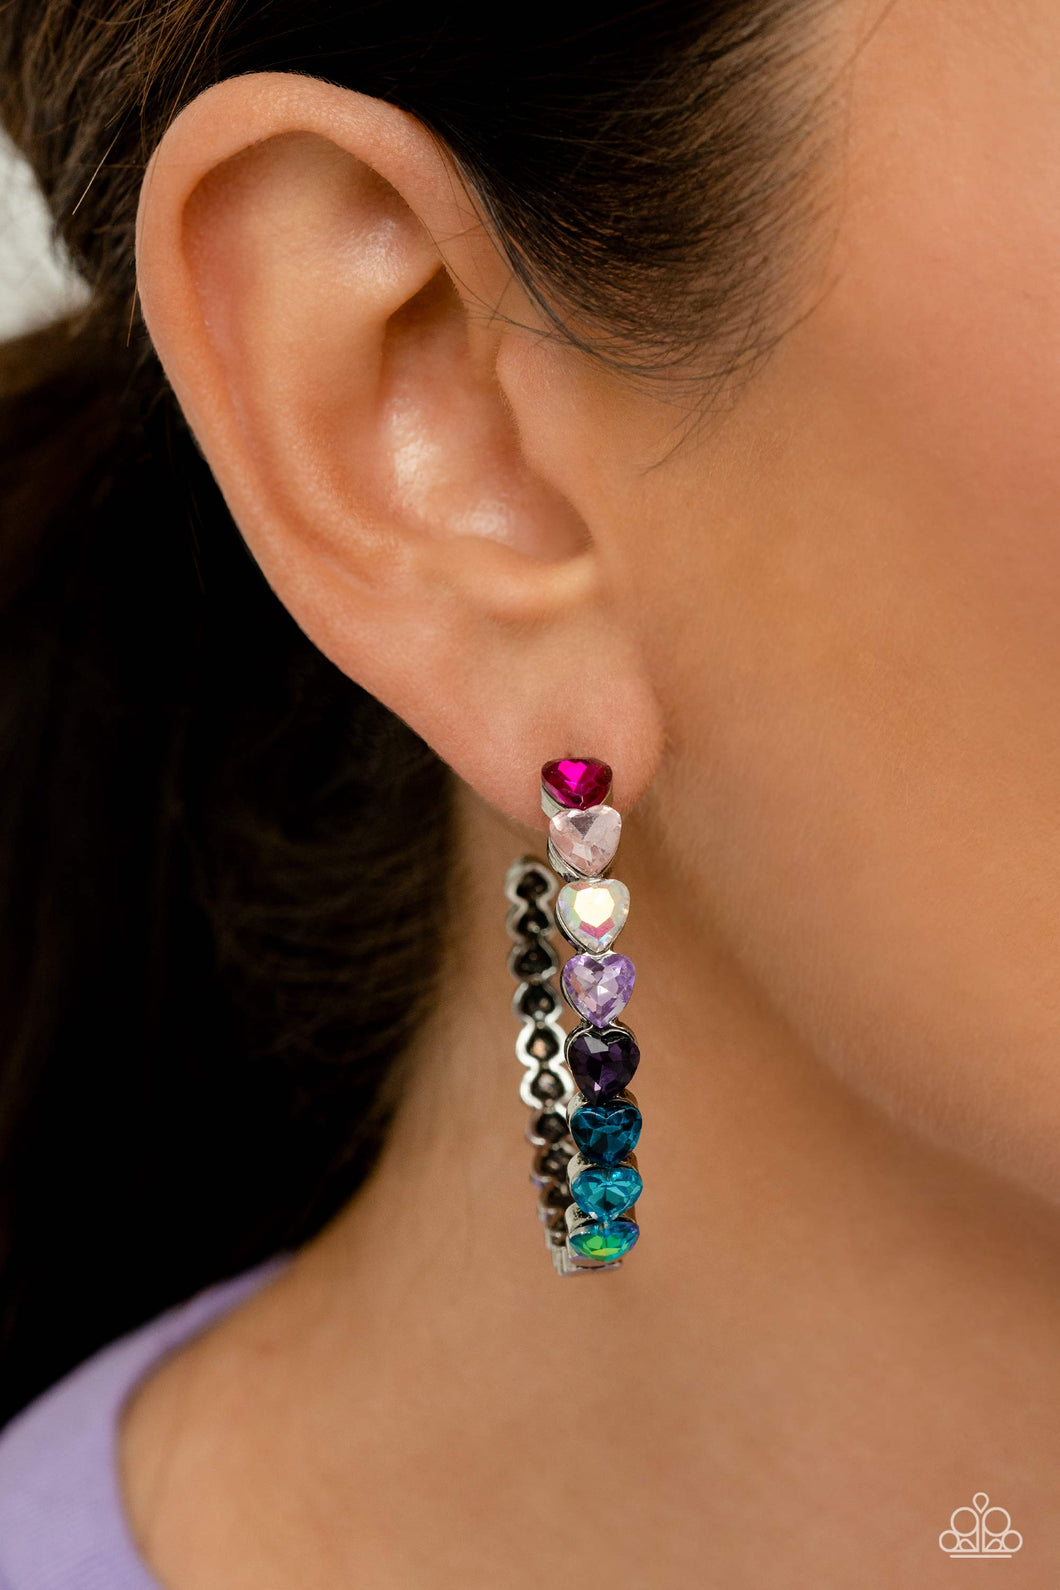 Featuring a scalloped heart frame, glittery heart rhinestones in shades of pink, iridescence, purple, blue, and a refracted green shimmer slowly decrease in size as they curve down the ear to meet dainty silver hearts for a romantic statement. Earring attaches to a standard post fitting. Hoop measures approximately 1 3/4